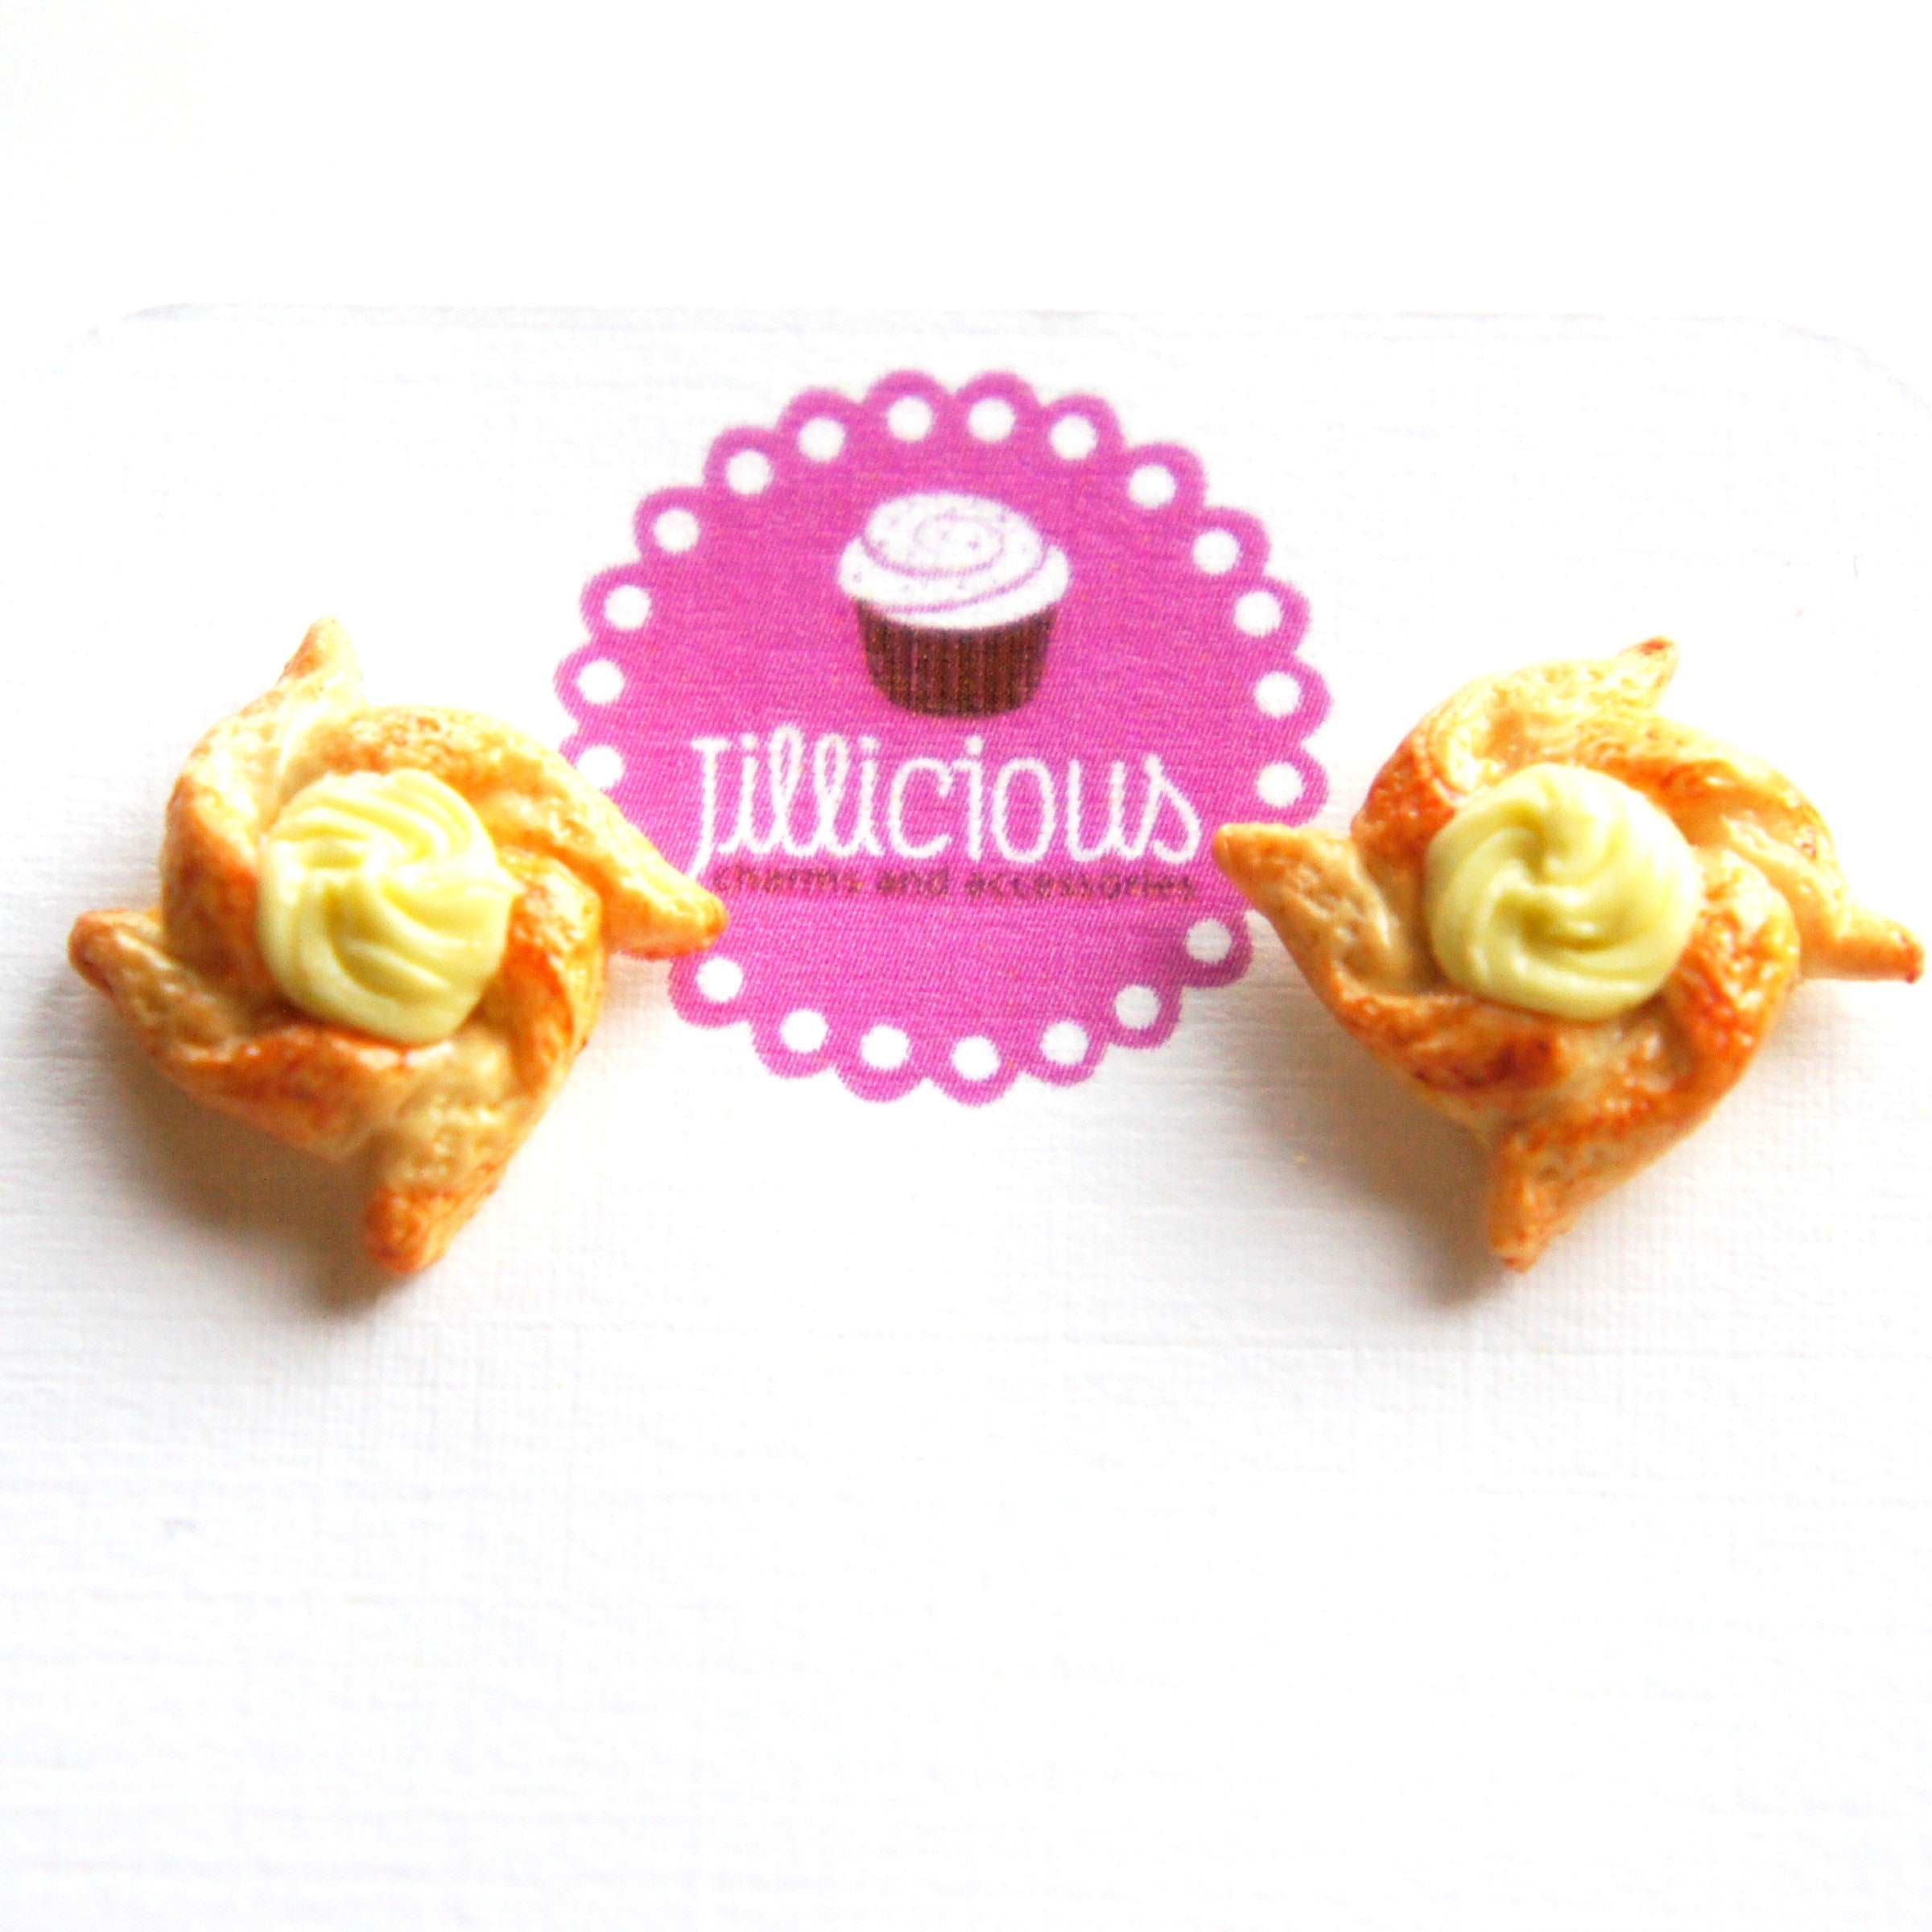 Custard Pinwheel Pastry Earrings - Jillicious charms and accessories